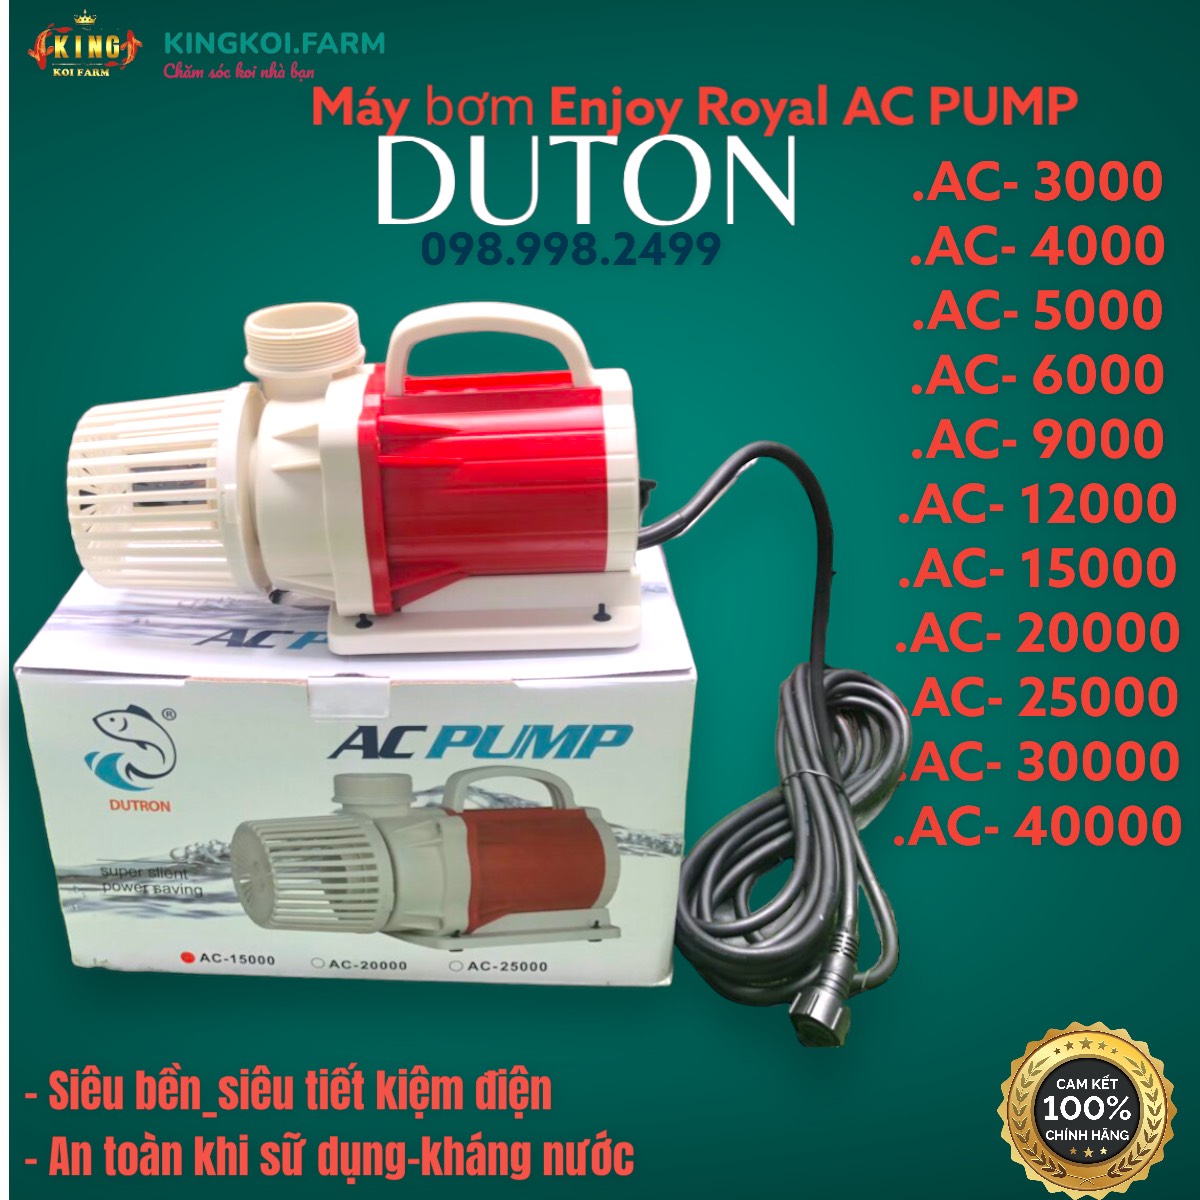 Dunon pump for Royal ac booster pump comes with high